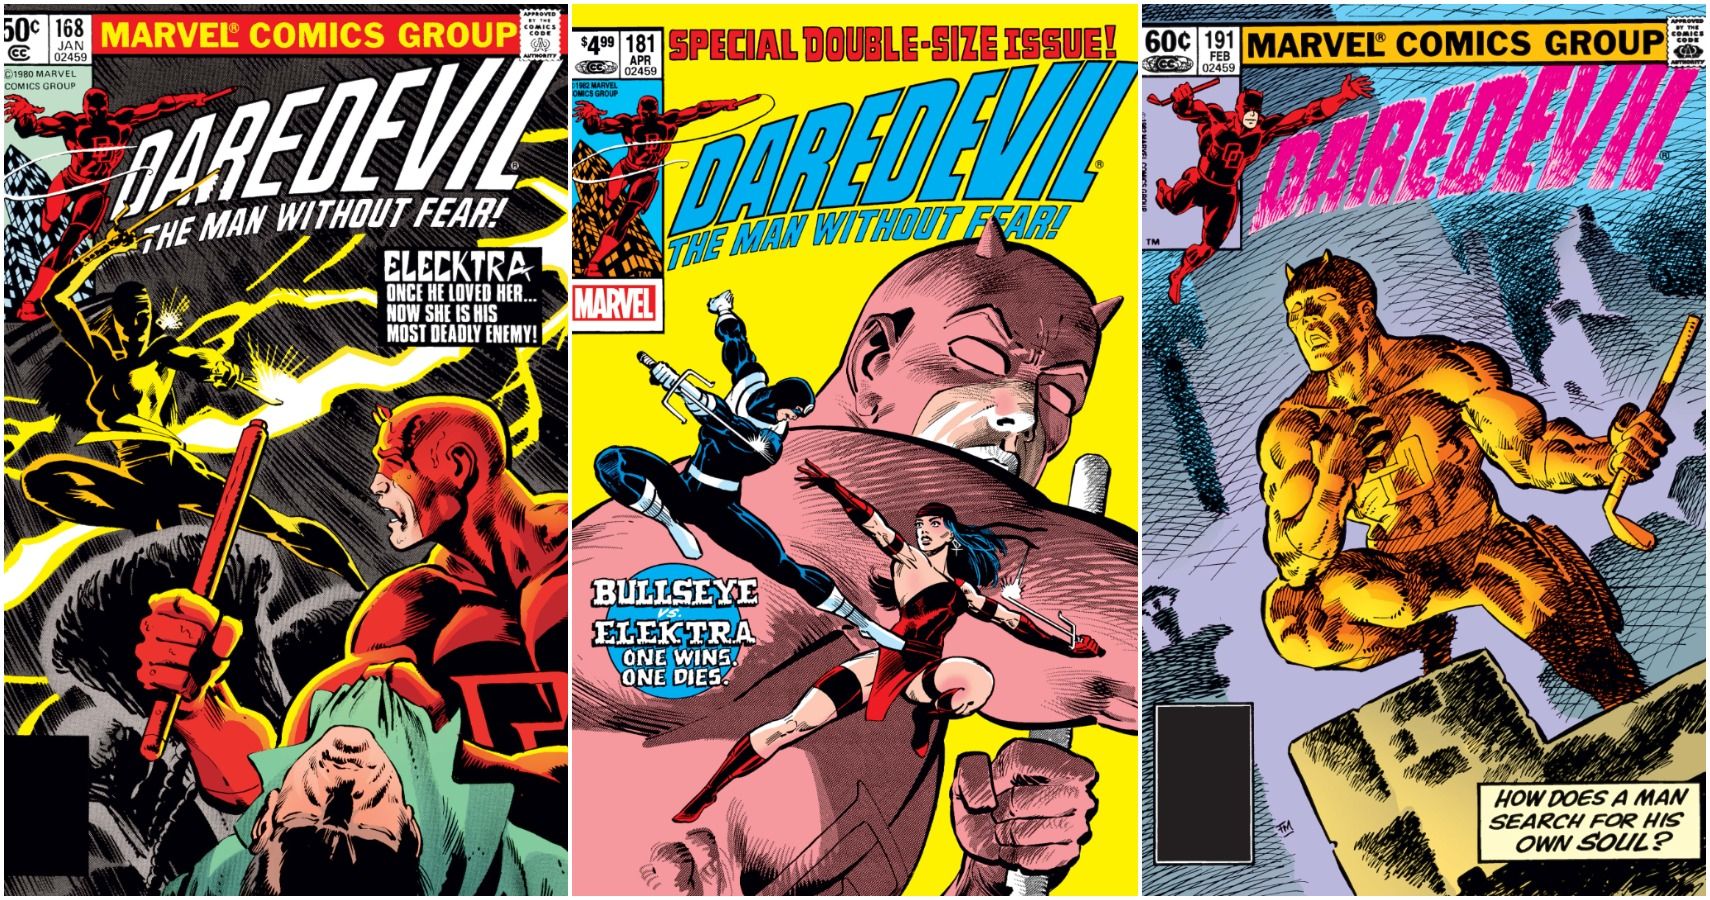 Split Image - Daredevil Fights Elektra, Bullseye and Stands On A Rooftop